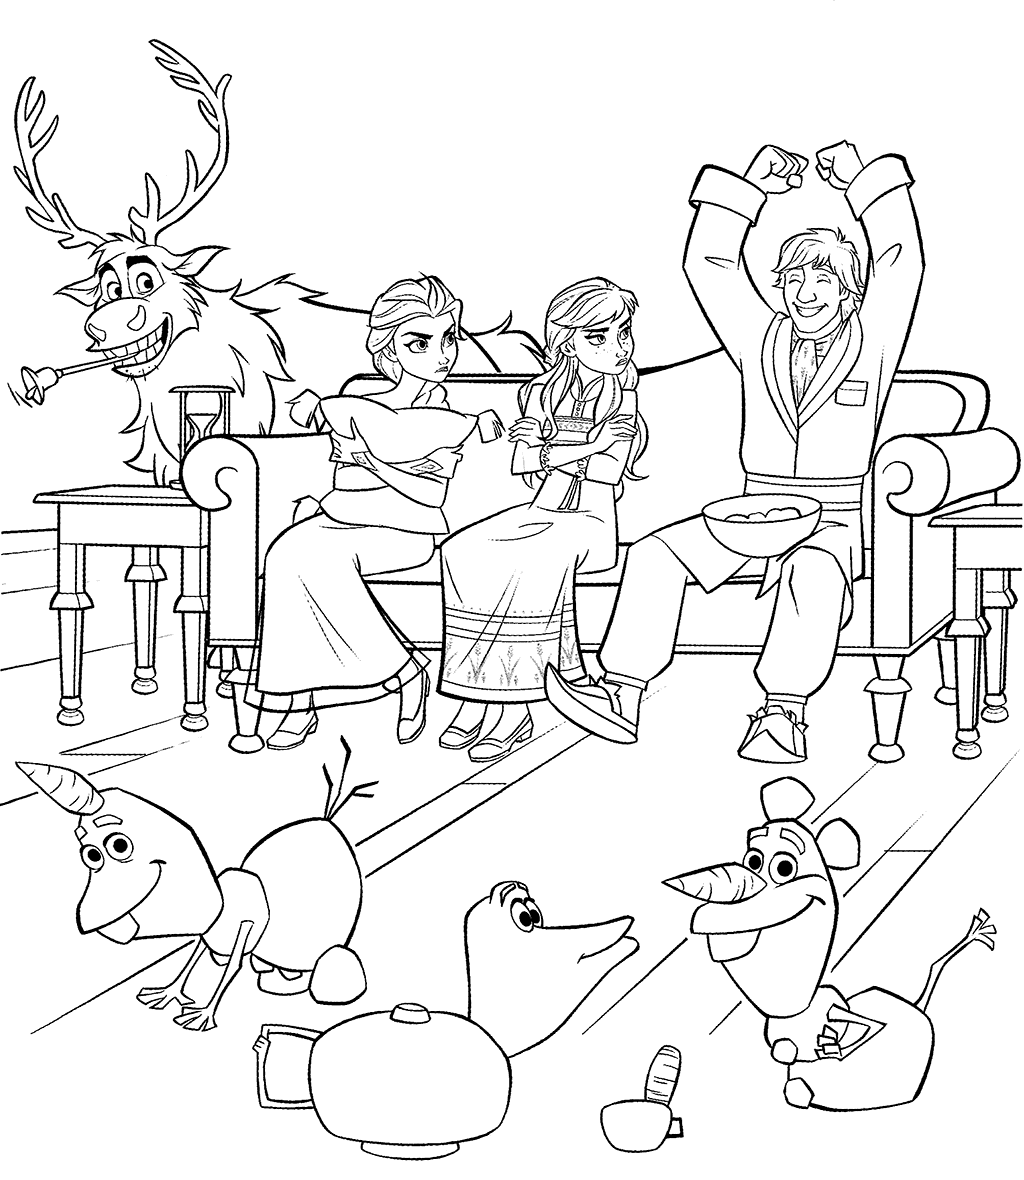 Funny Frozen 2 Coloring Page